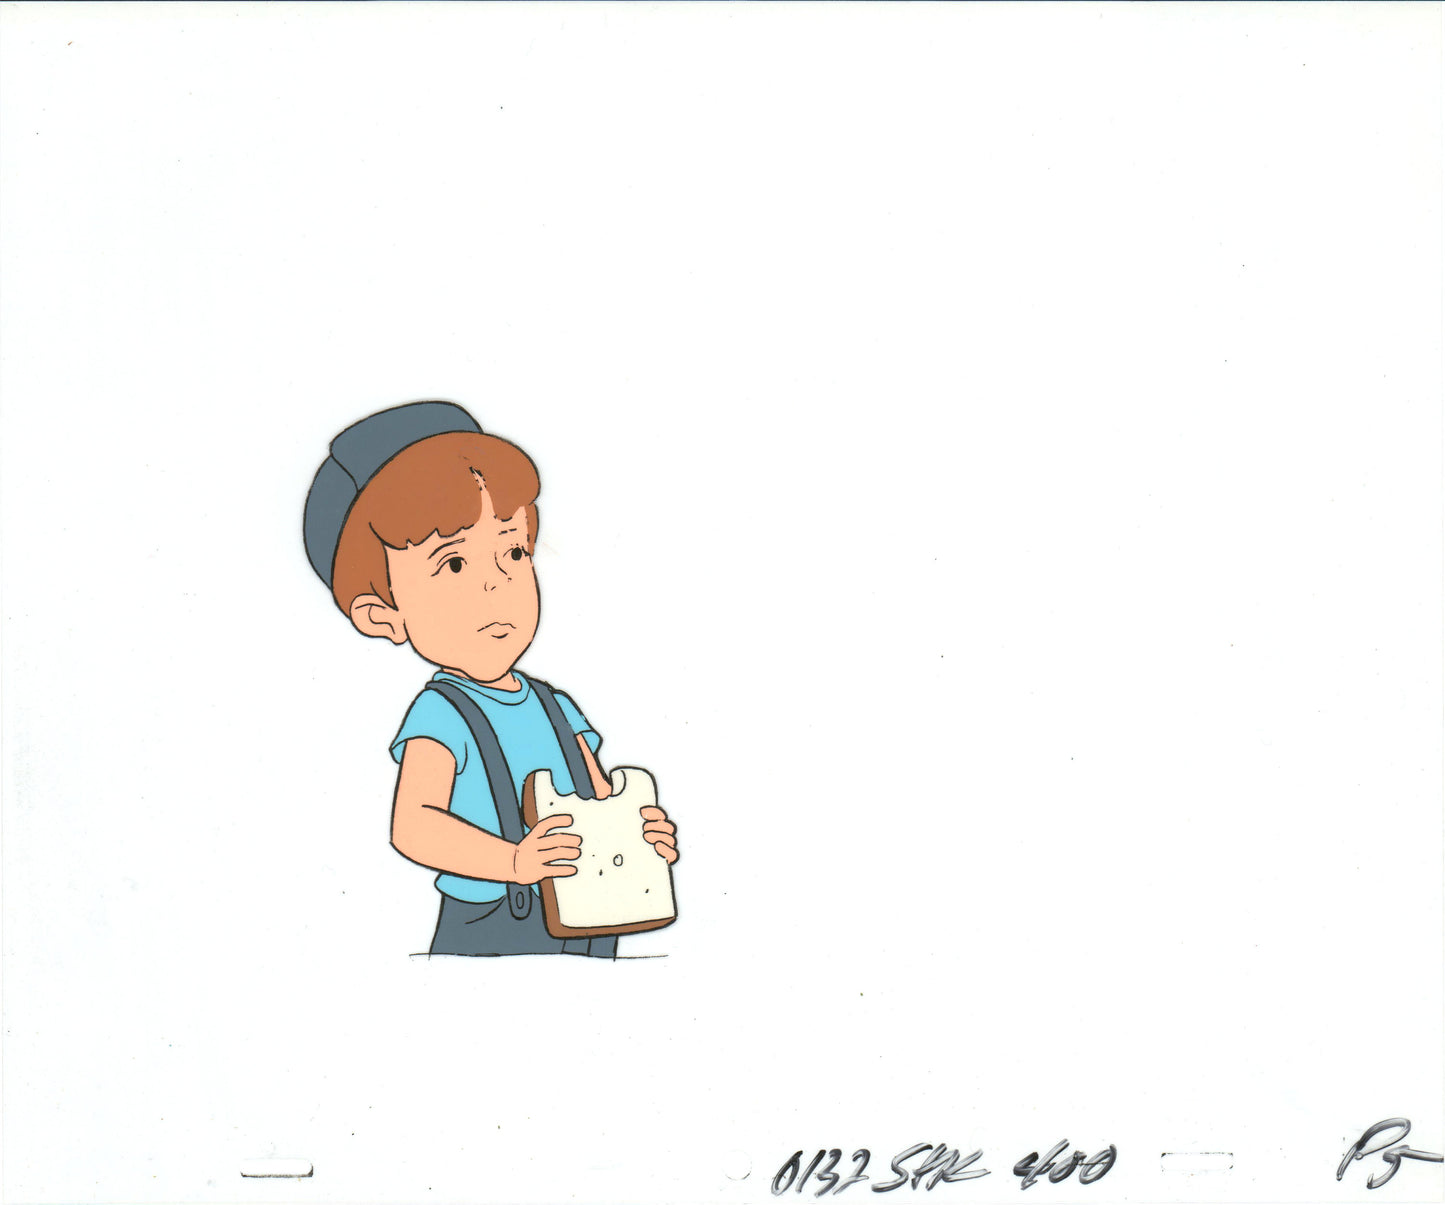 Little Rascals Production Animation Cel with Darla from Hanna Barbera 1982-83 m83